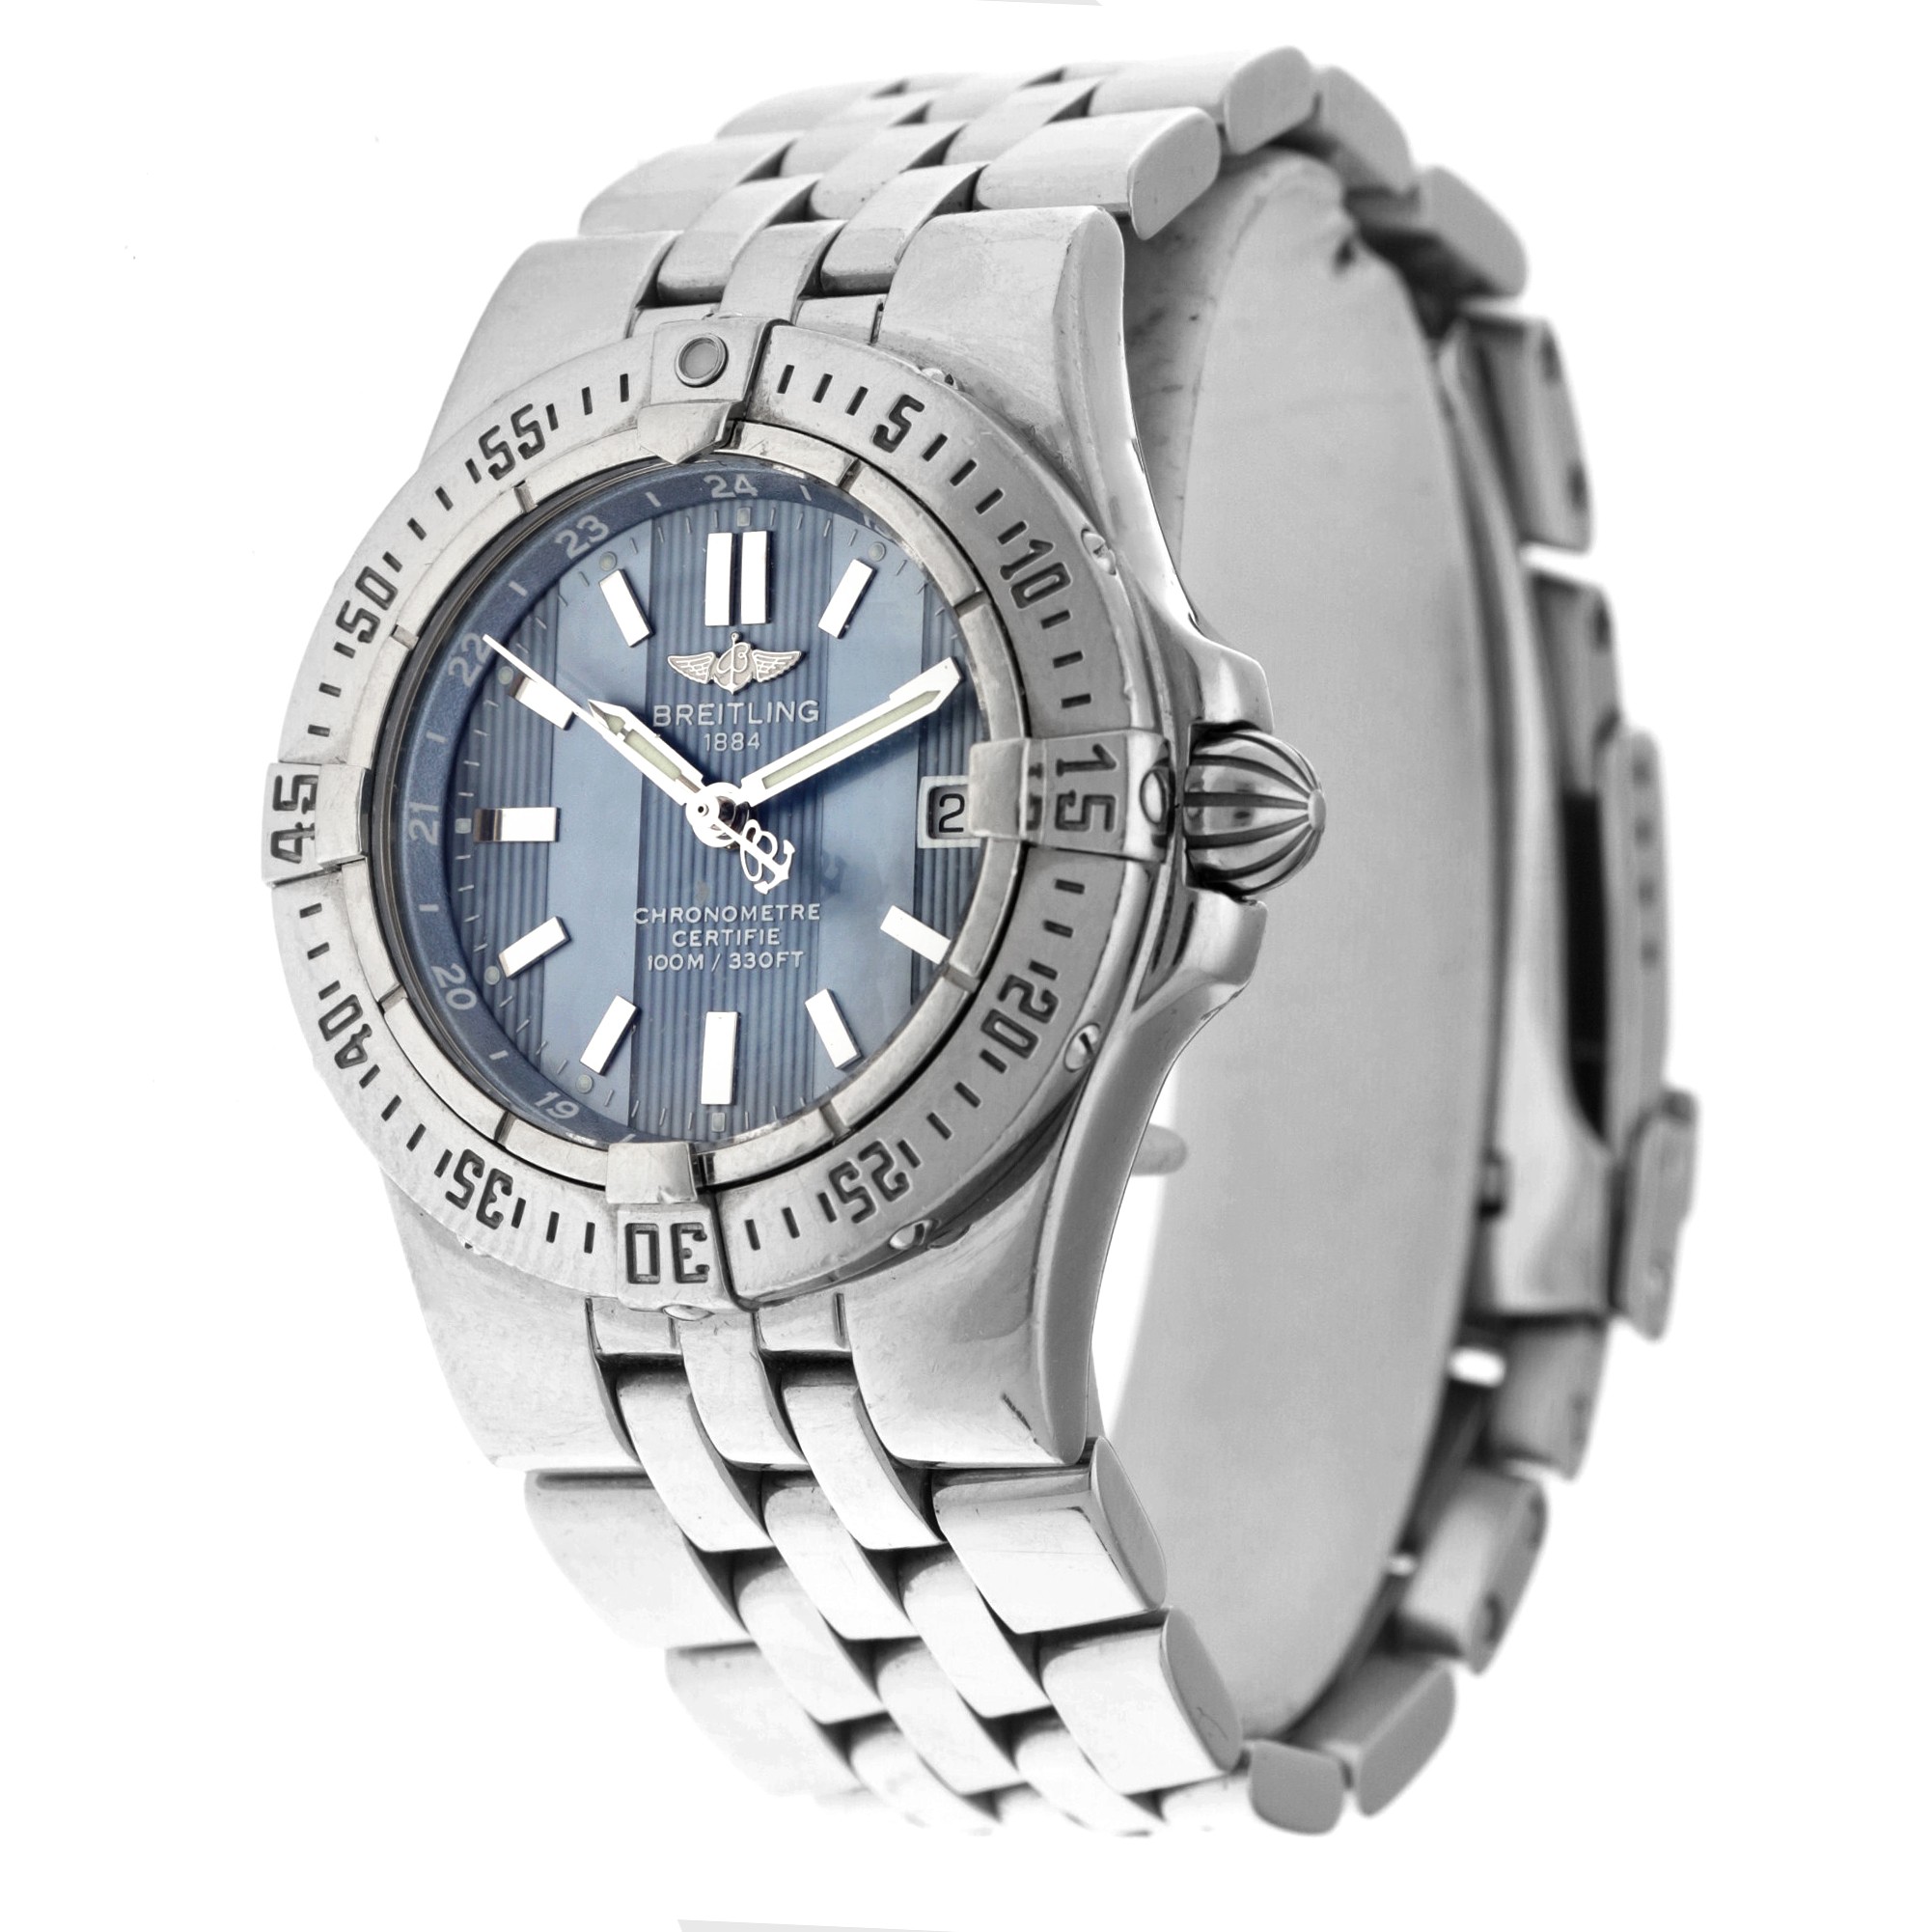 No Reserve - Breitling Galactic Starliner A71340 - Ladies watch - 2008. - Image 2 of 7